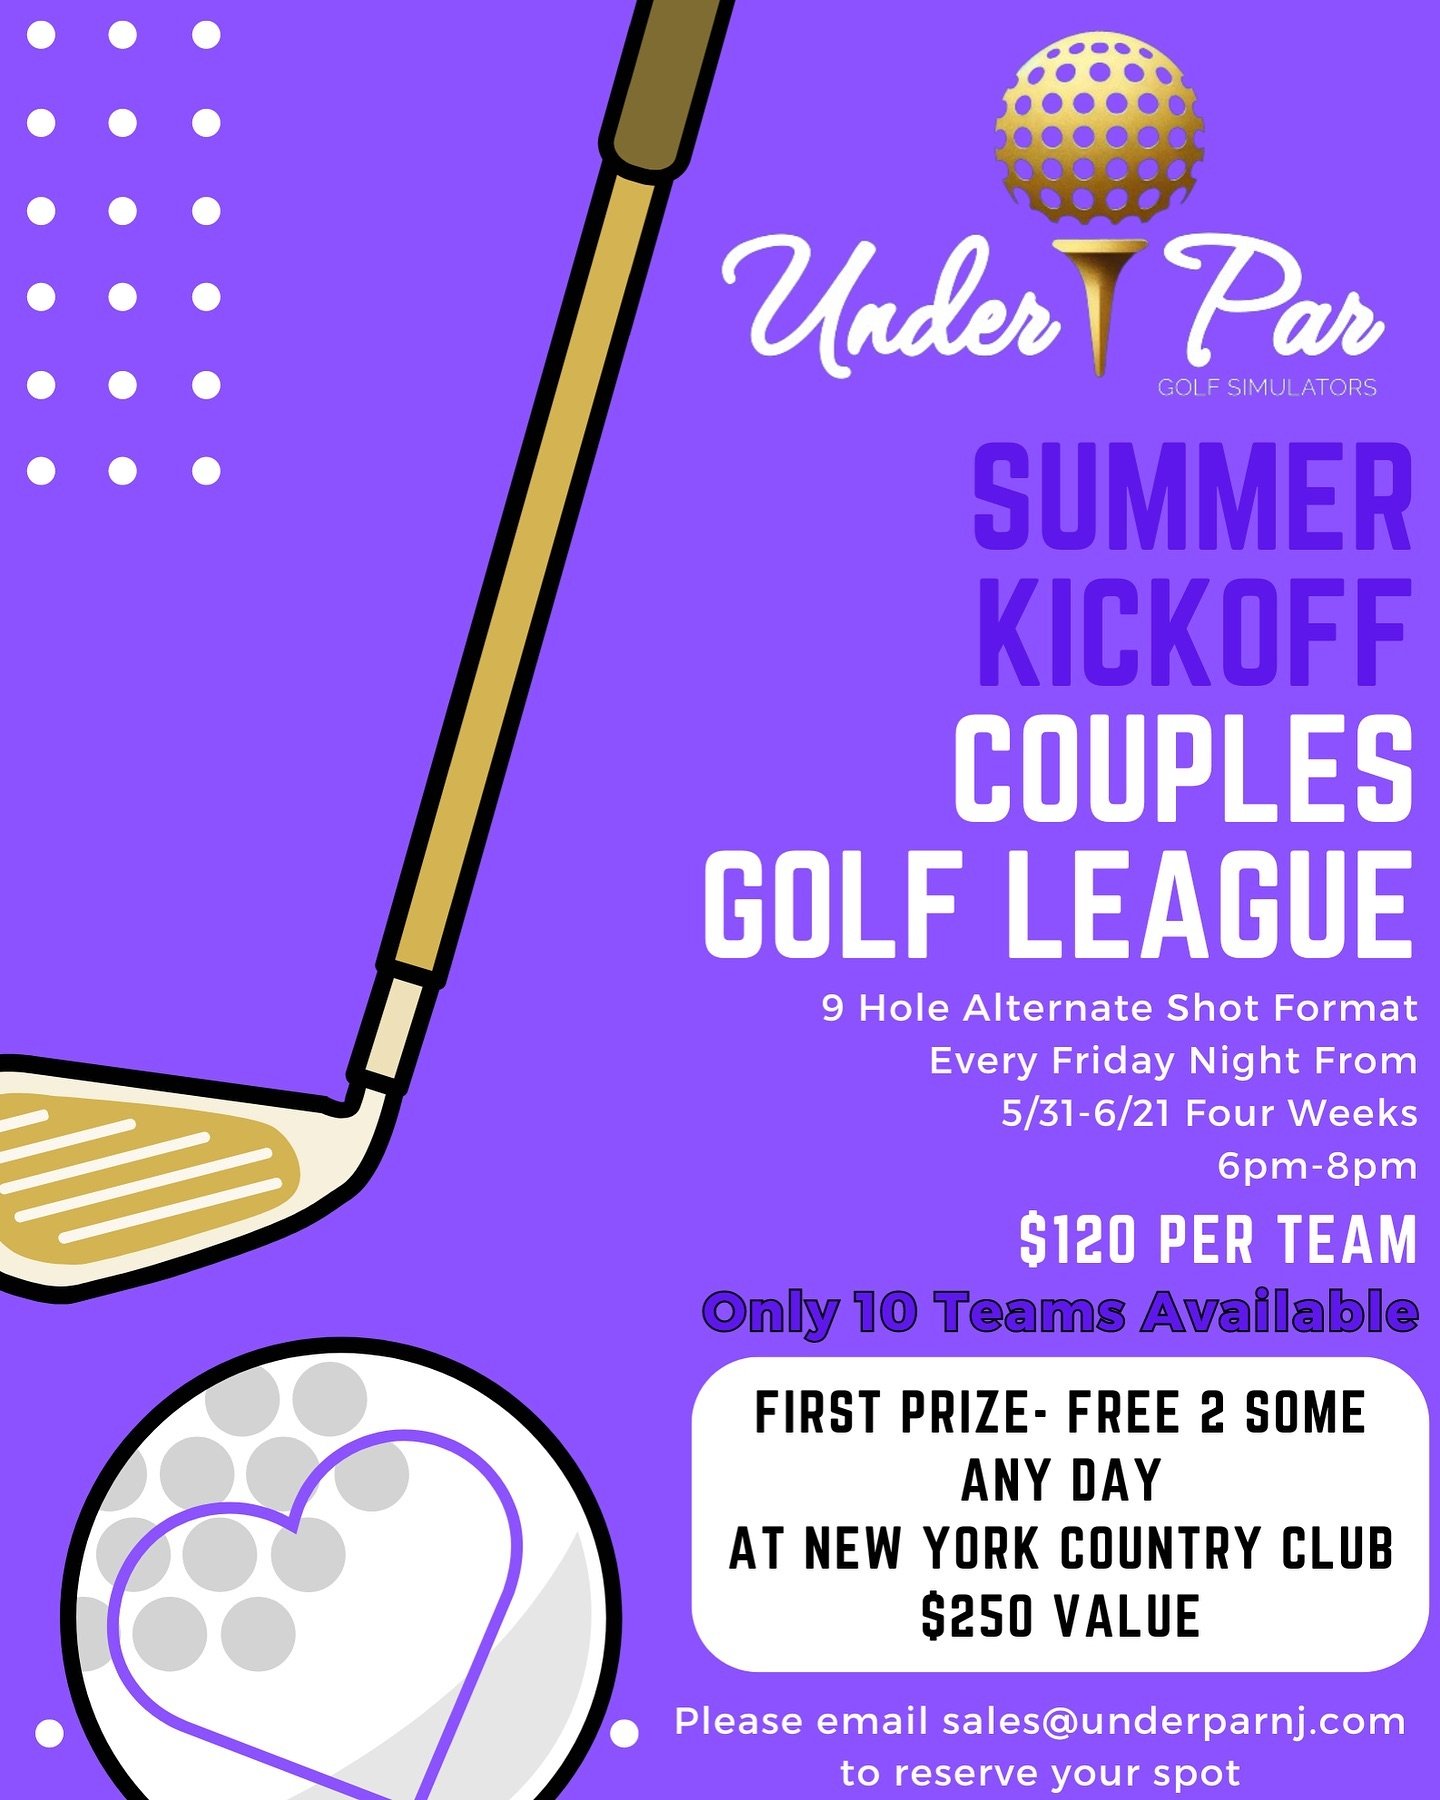 Summer Kick Off Couples League!⁣
⁣
Reach out to use via email or just DM us to inquire! Only 10 teams available!❤️